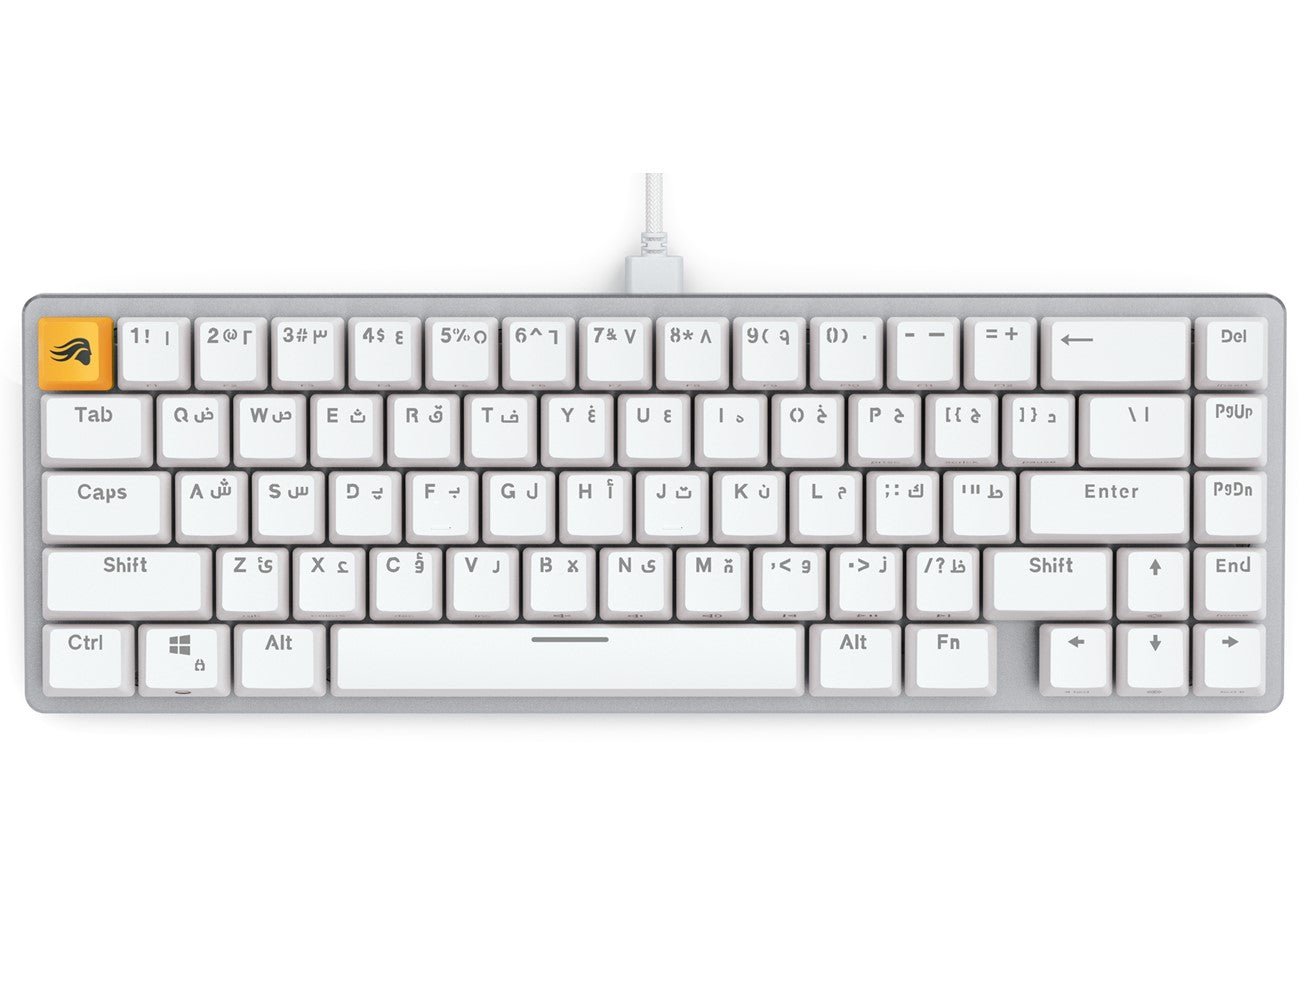 Glorious GMMK2 Full Size 96% Pre-Built Wired RGB Mechanical Gaming Keyboard (Supporting Arabic Layout) - White - Level UpGloriousPC Gaming Accessories810069975177